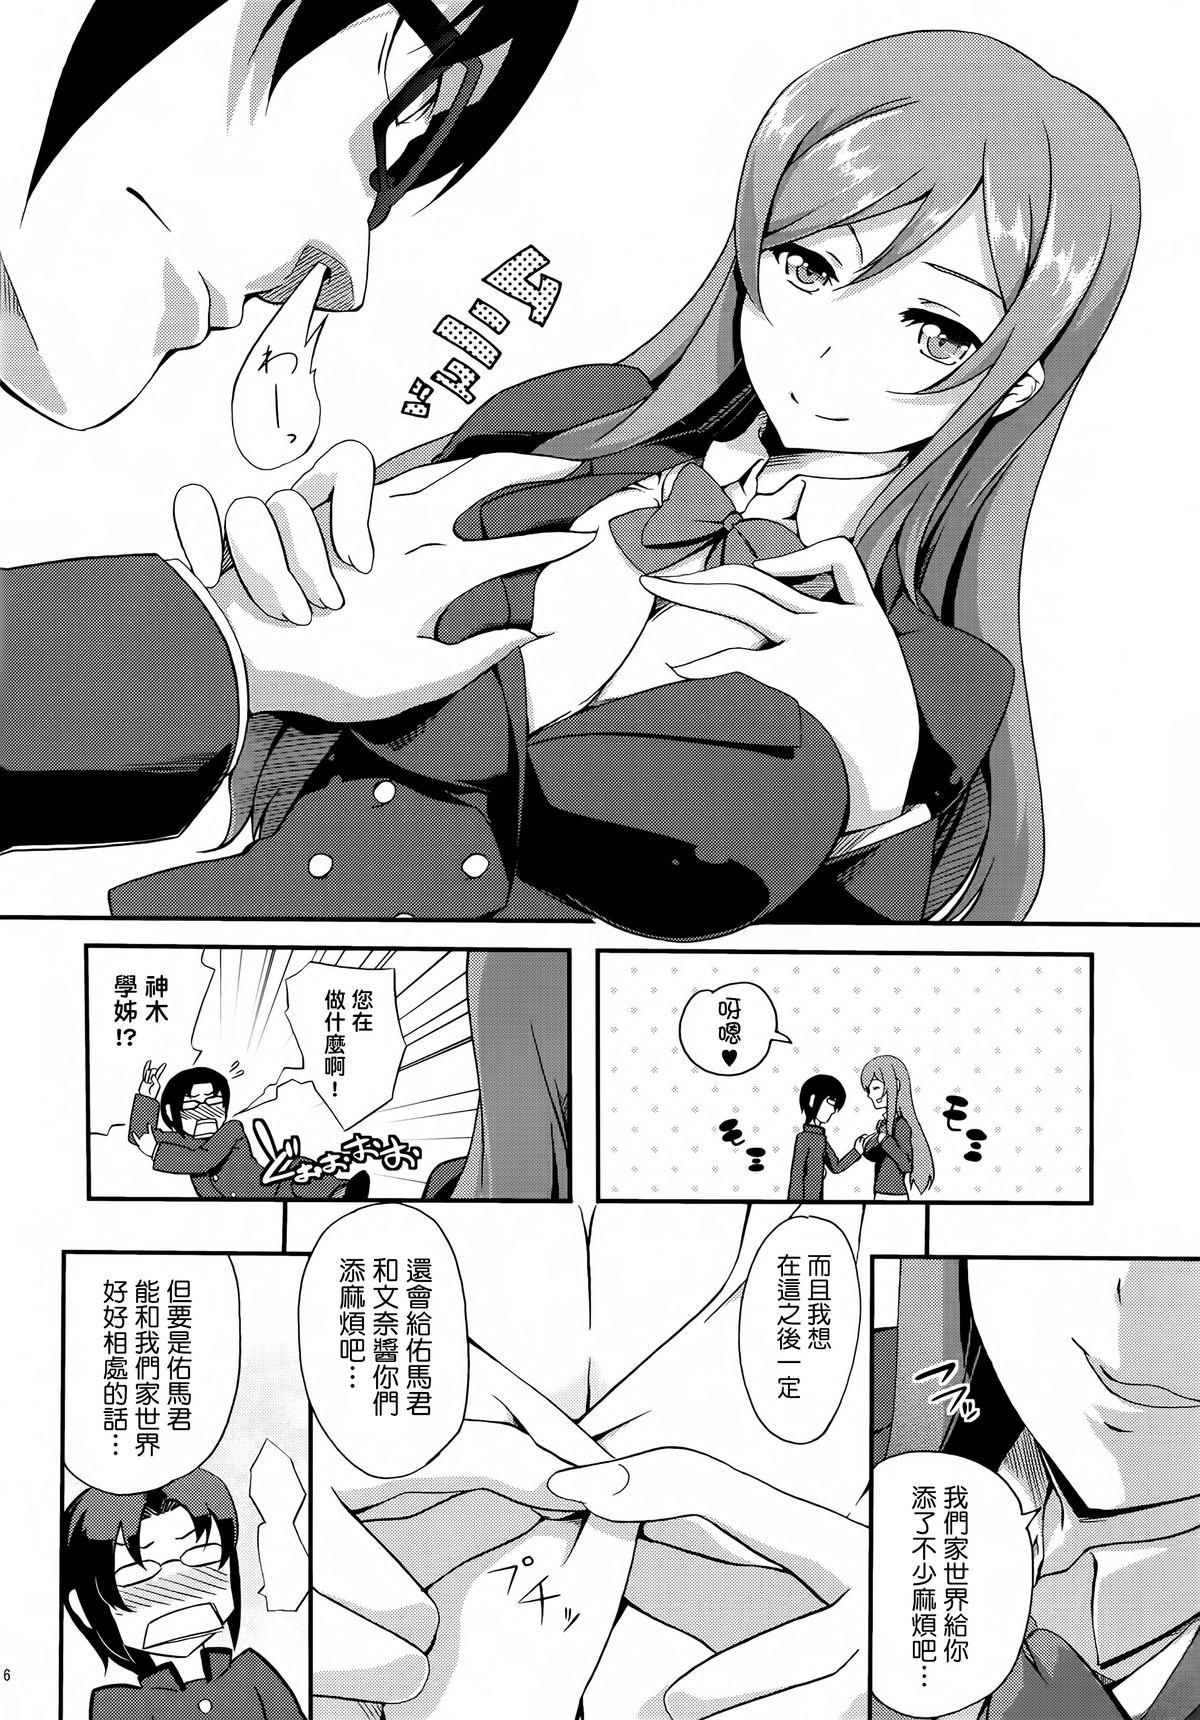 Moms Mirai no Onegai - Gundam build fighters try Step - Page 6